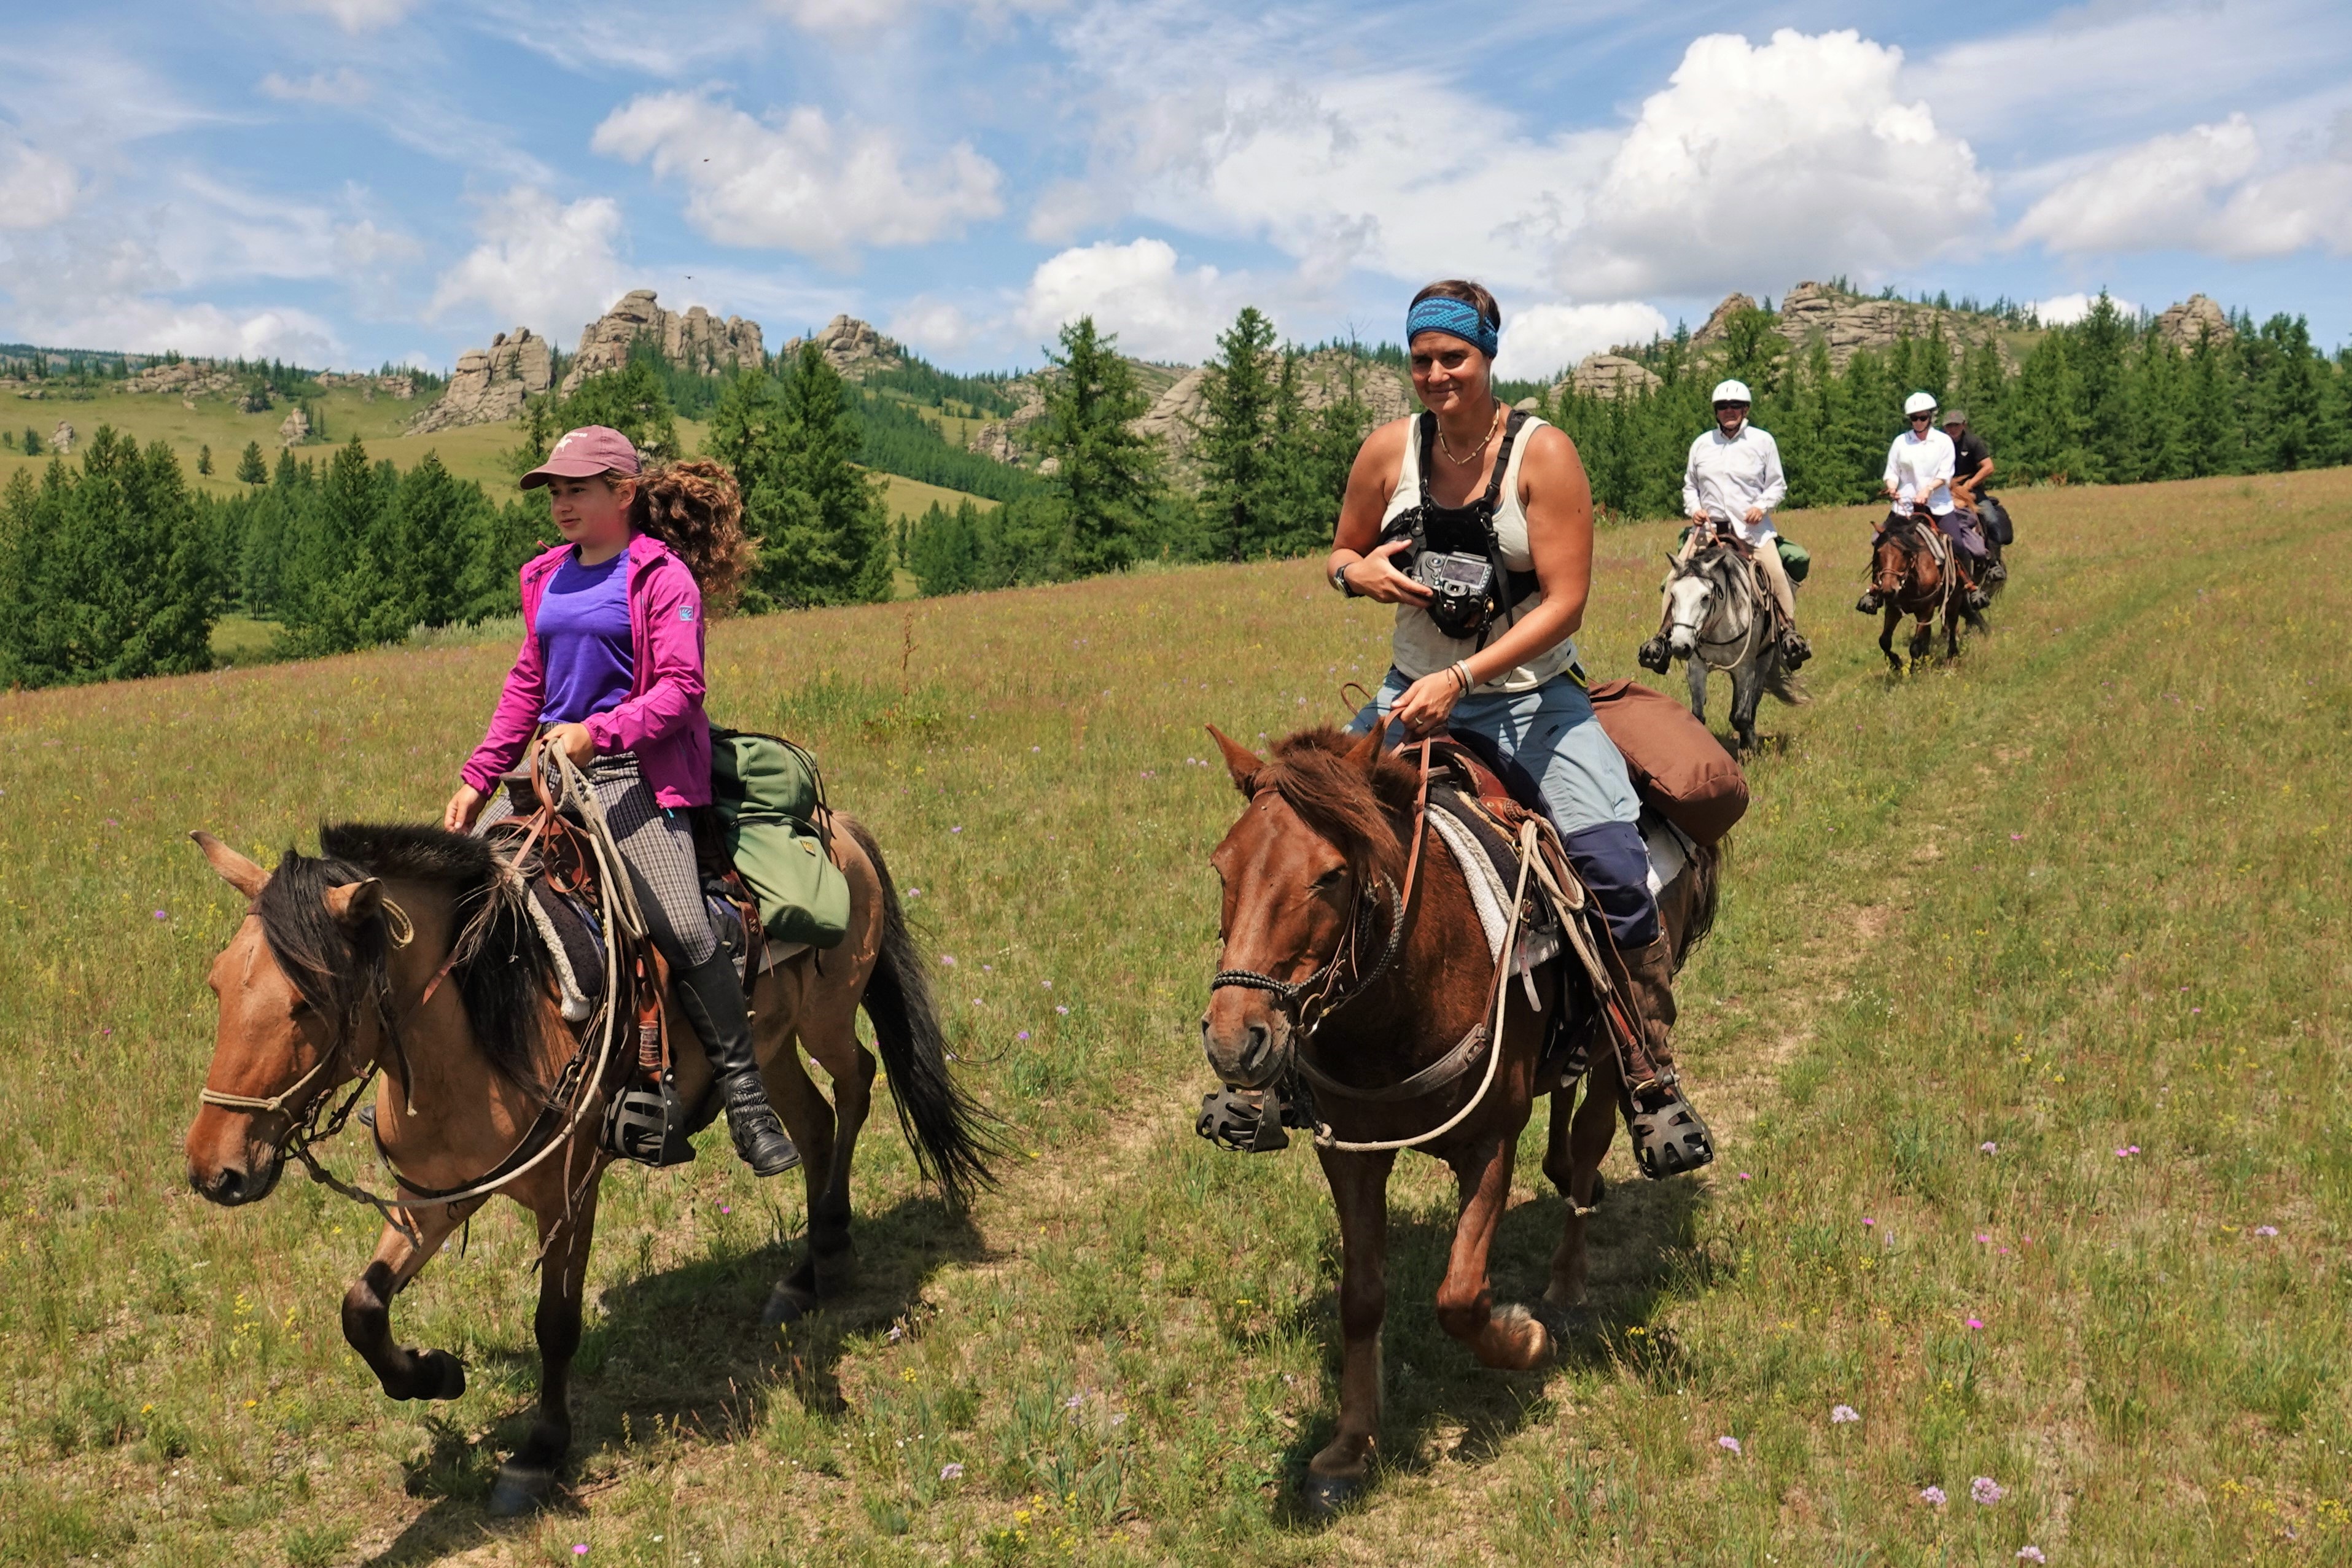 8 Good Reasons to choose Stone Horse Expeditions for riding vacations in Mongolia